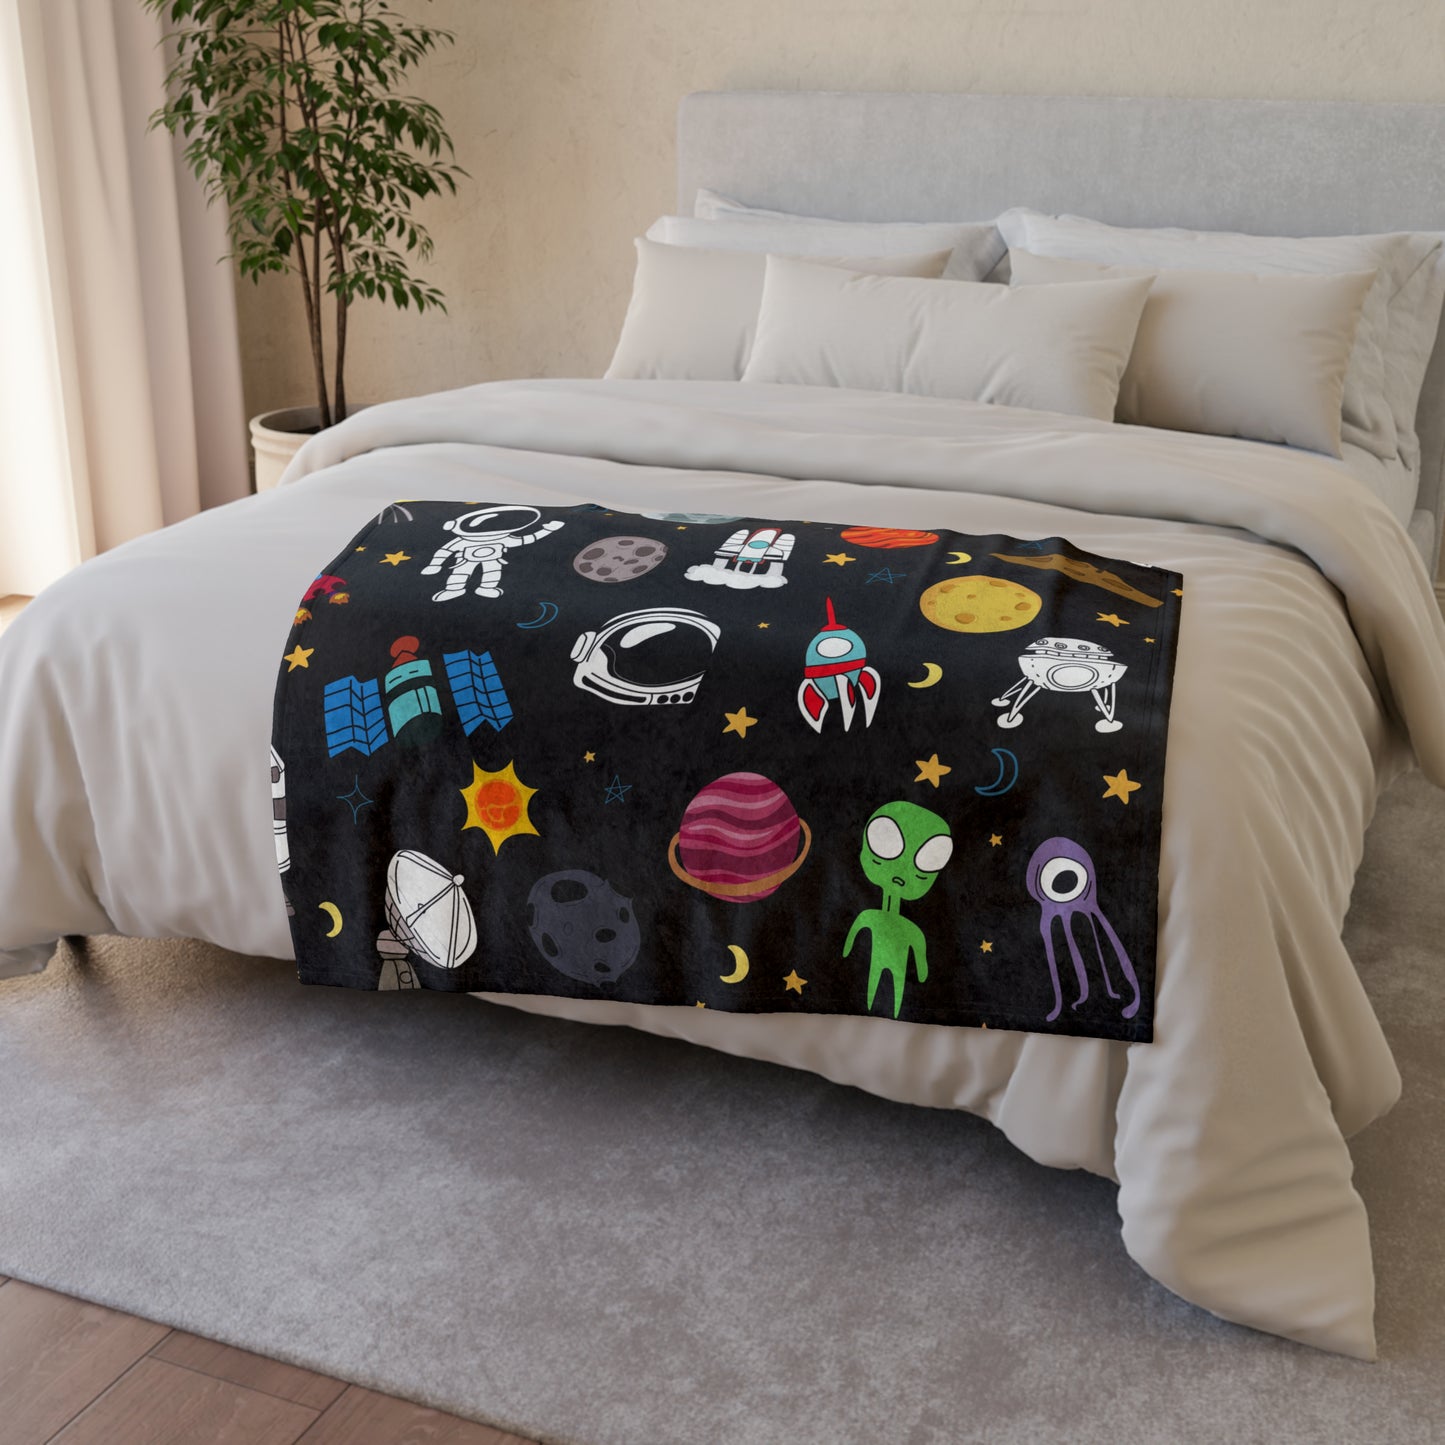 Give Me Some Space - Soft Polyester Blanket 30'' × 40'' Blanket